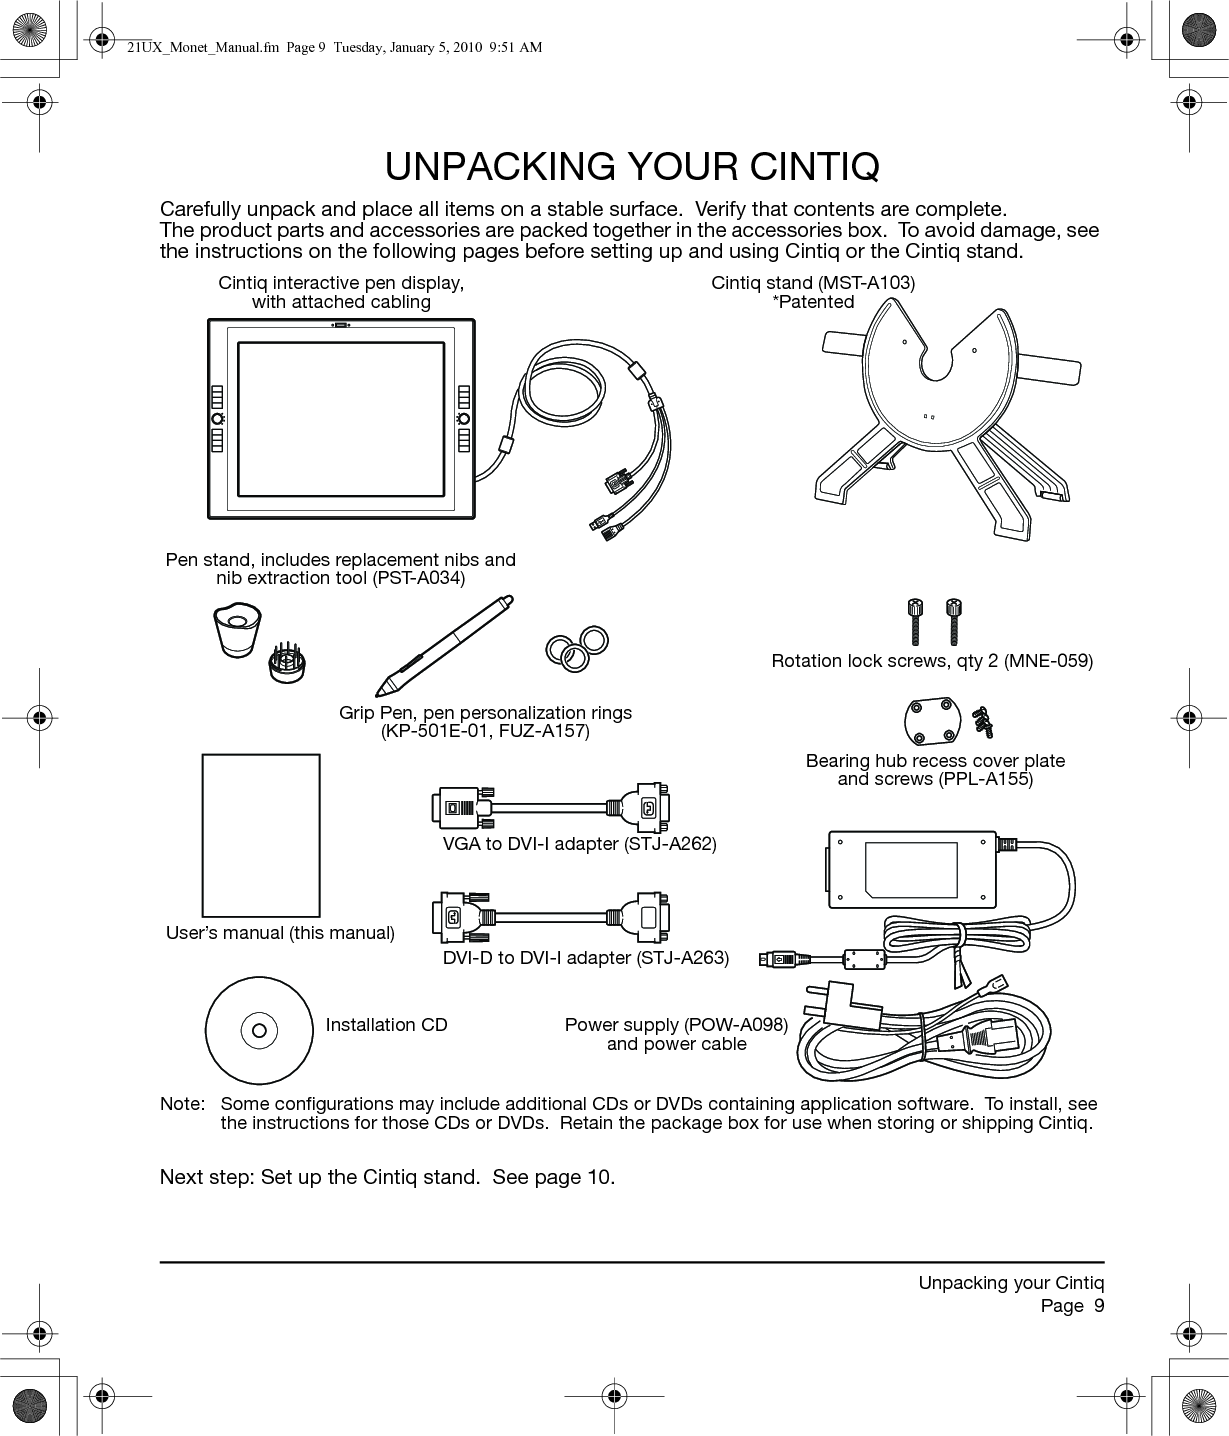 Unpacking your CintiqPage  9UNPACKING YOUR CINTIQCarefully unpack and place all items on a stable surface.  Verify that contents are complete.  The product parts and accessories are packed together in the accessories box.  To avoid damage, see the instructions on the following pages before setting up and using Cintiq or the Cintiq stand.Note:  Some configurations may include additional CDs or DVDs containing application software.  To install, see the instructions for those CDs or DVDs.  Retain the package box for use when storing or shipping Cintiq.Next step: Set up the Cintiq stand.  See page 10.Cintiq interactive pen display, with attached cablingCintiq stand (MST-A103) *PatentedGrip Pen, pen personalization rings(KP-501E-01, FUZ-A157)User’s manual (this manual)Installation CDVGA to DVI-I adapter (STJ-A262)DVI-D to DVI-I adapter (STJ-A263)Rotation lock screws, qty 2 (MNE-059)Bearing hub recess cover plate and screws (PPL-A155)Power supply (POW-A098)and power cablePen stand, includes replacement nibs and nib extraction tool (PST-A034)21UX_Monet_Manual.fm  Page 9  Tuesday, January 5, 2010  9:51 AM